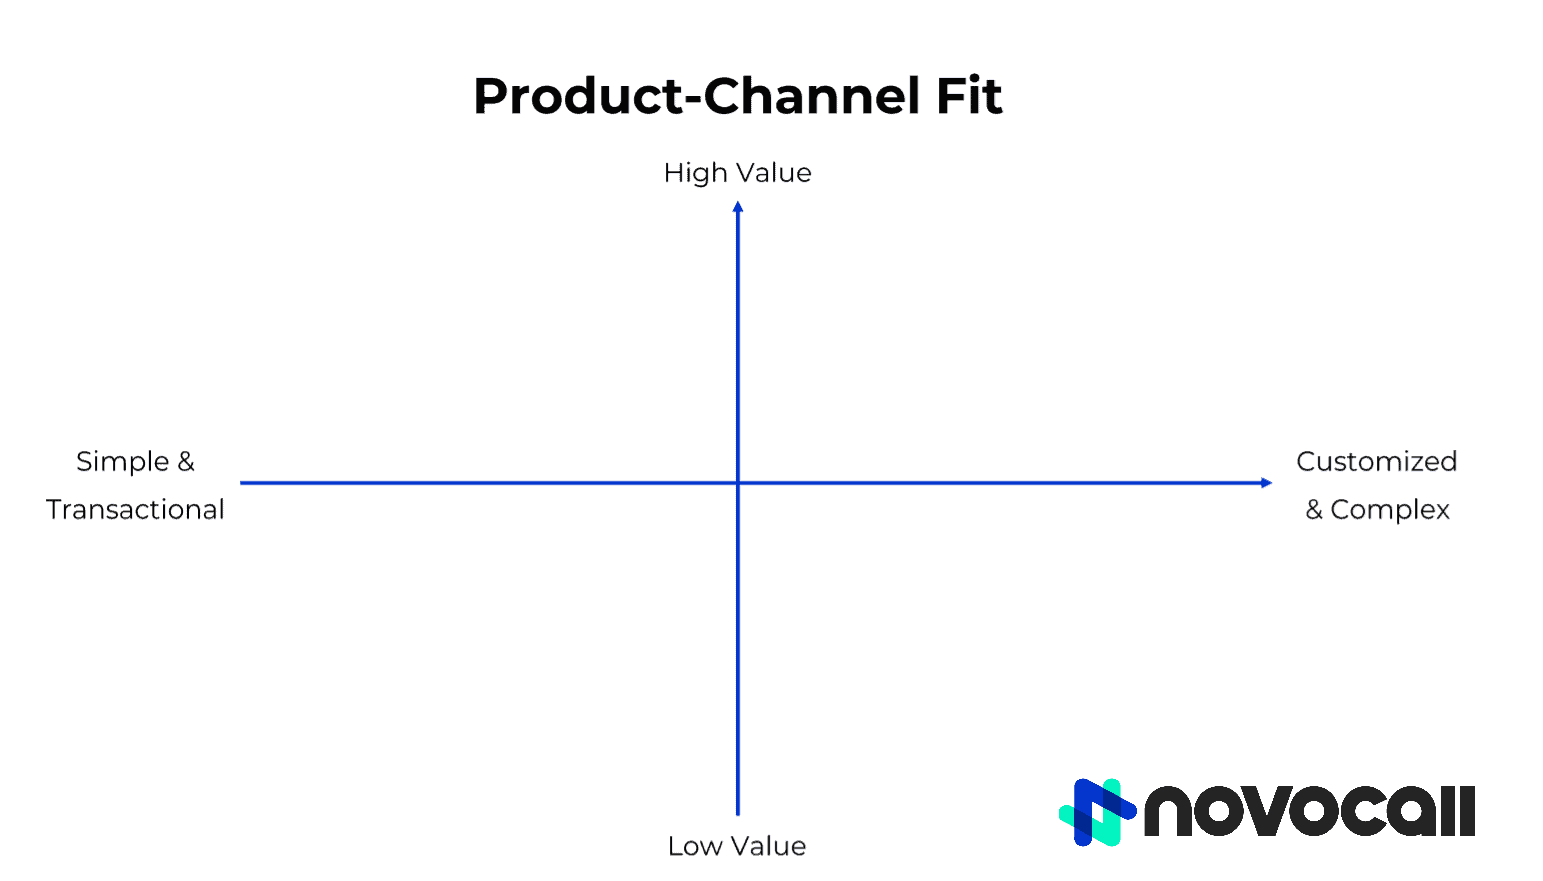 Product-Channel Fit axes.